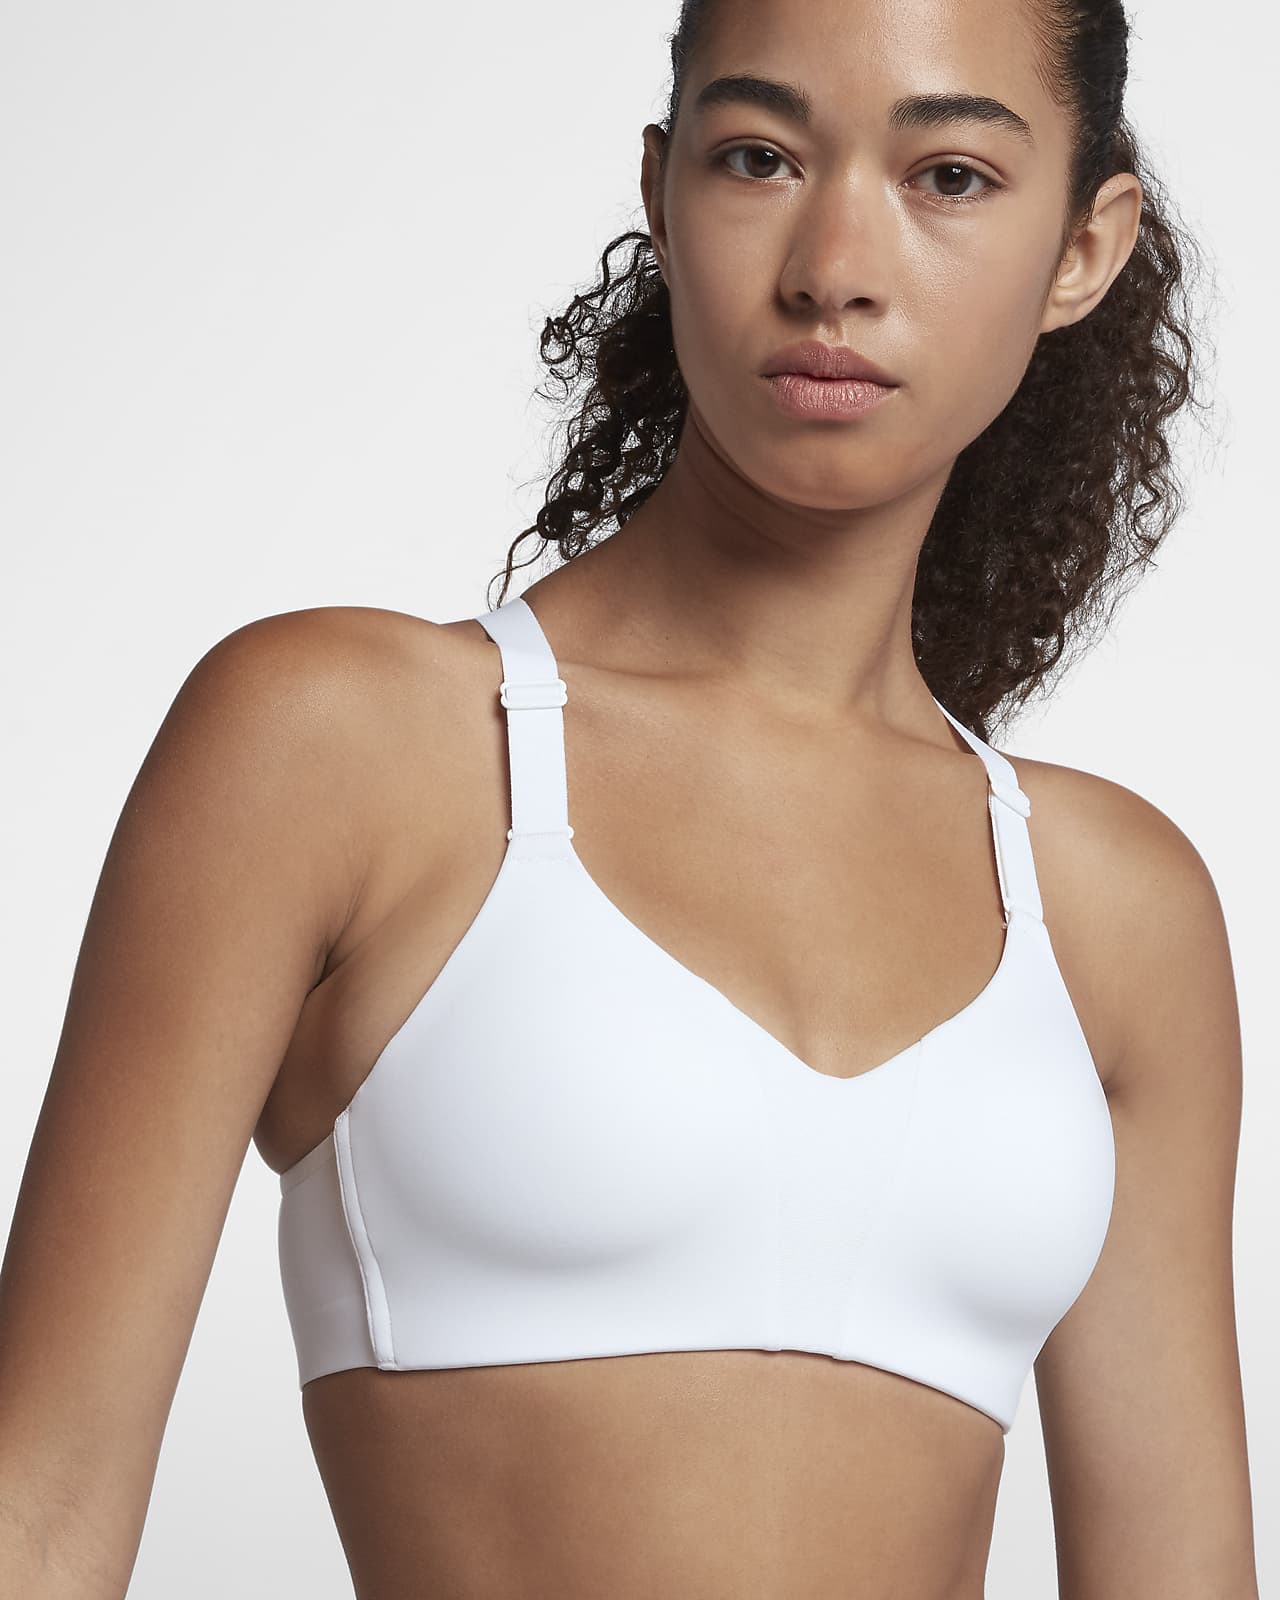 Nike Dri-FIT Rival Women's High-Support 